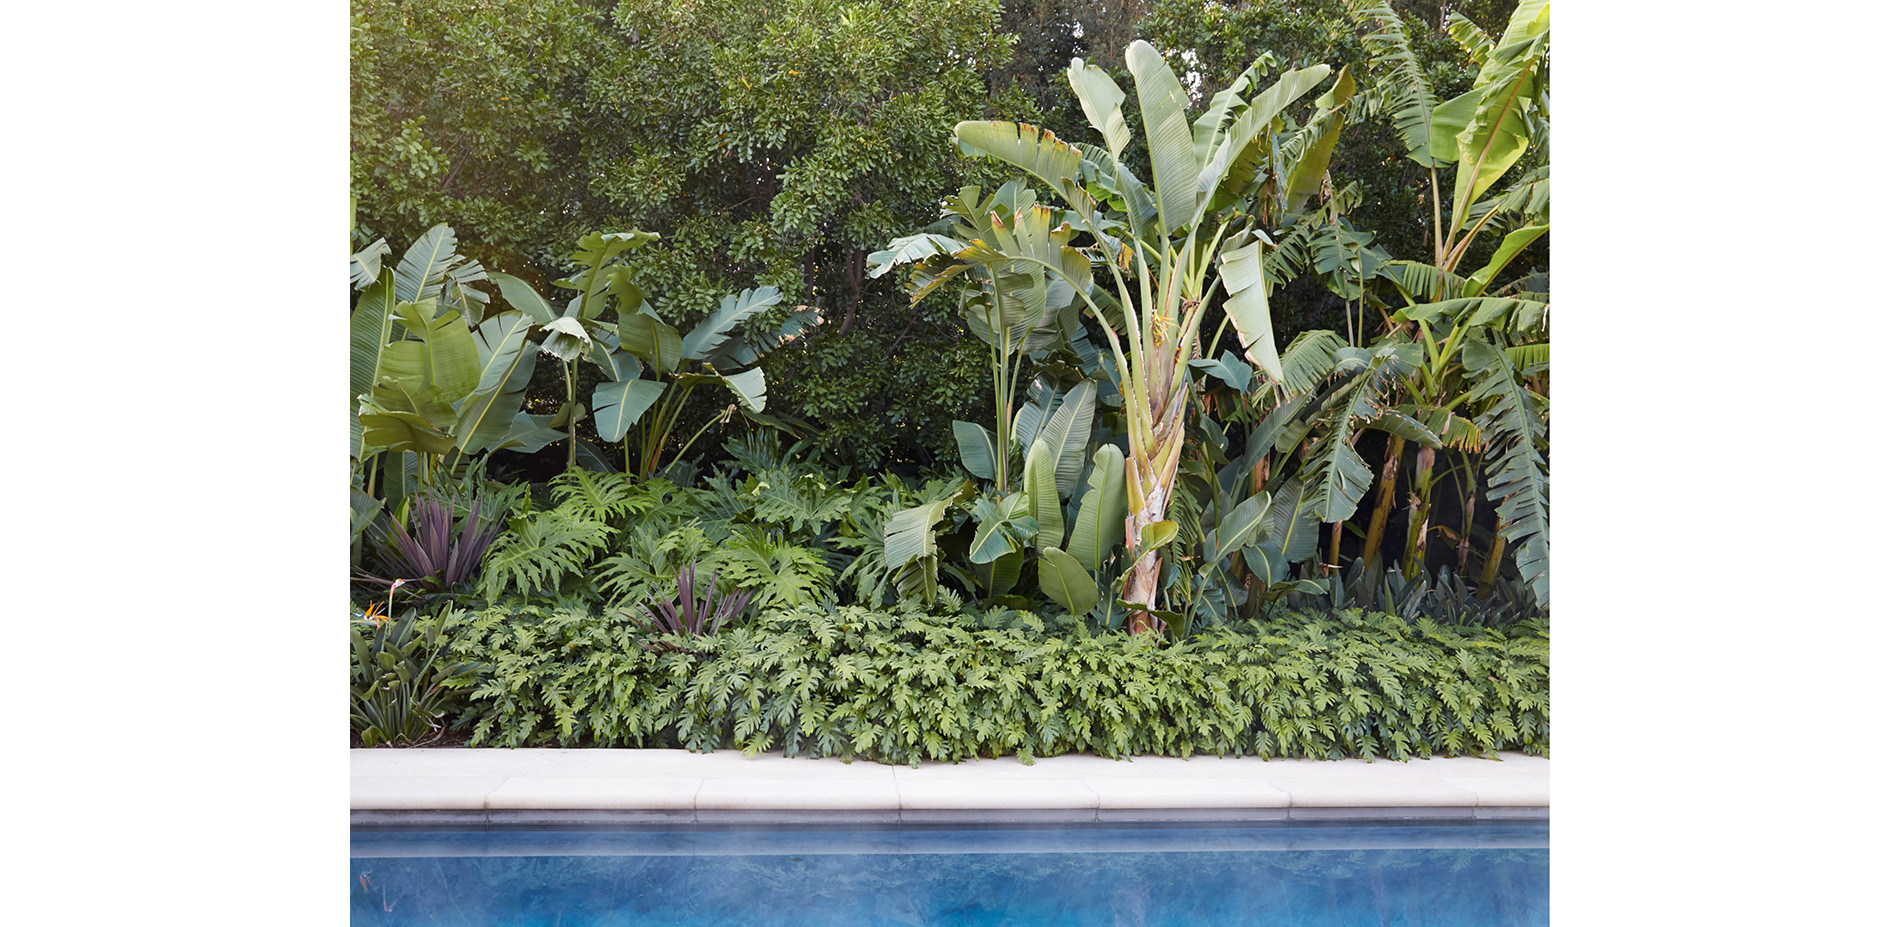 Large-leafed Tropical Plants Around the Pool